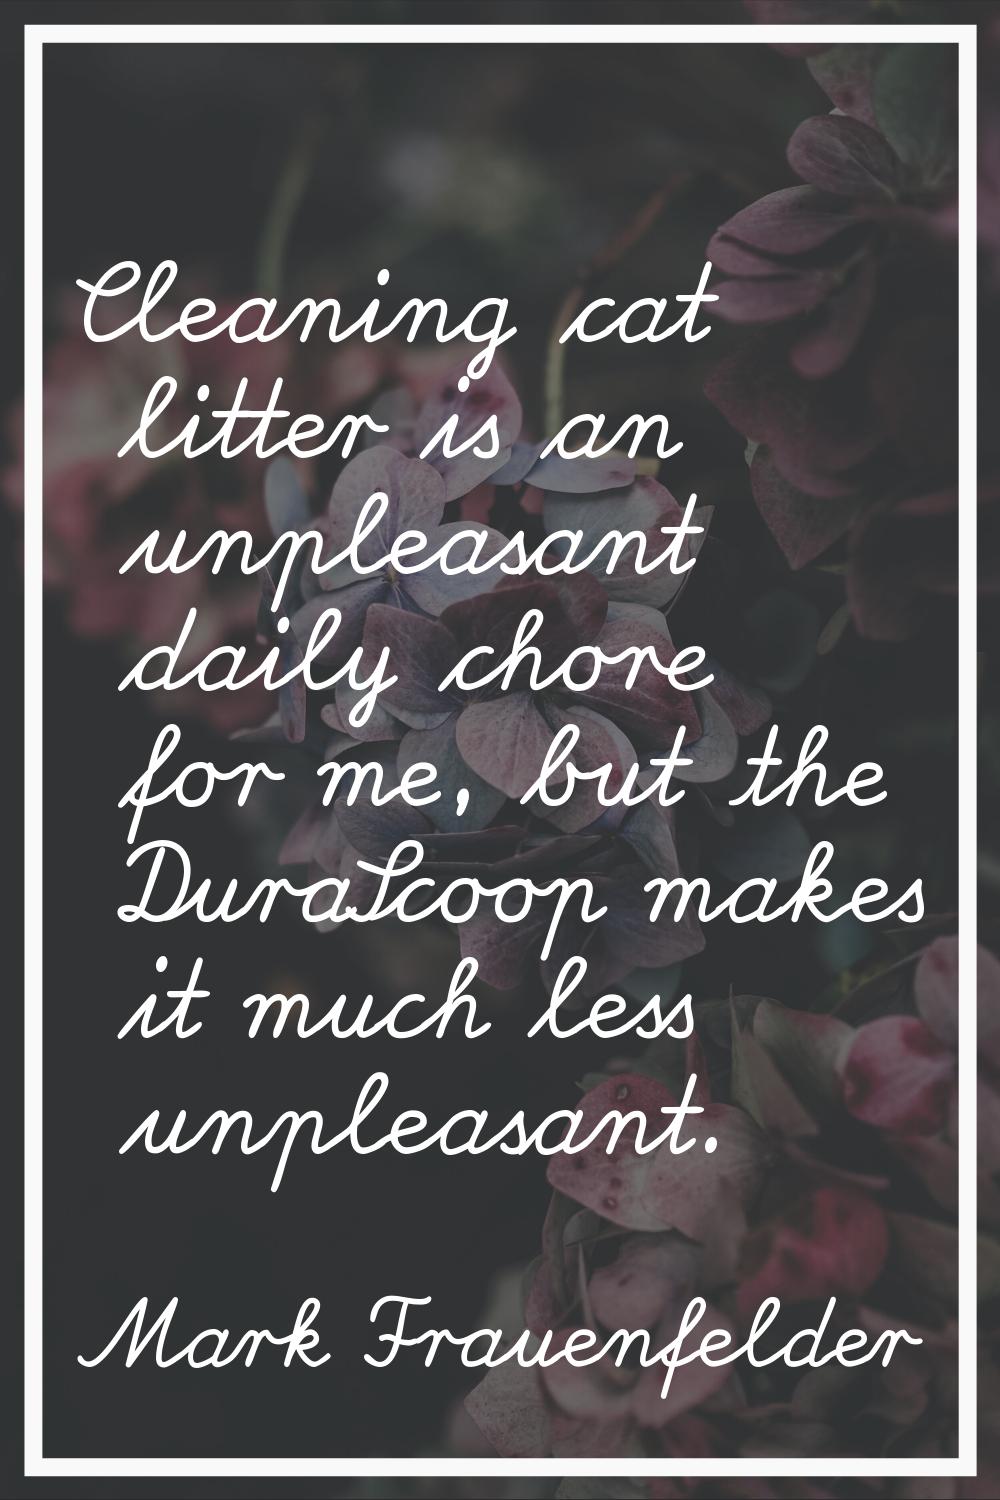 Cleaning cat litter is an unpleasant daily chore for me, but the DuraScoop makes it much less unple